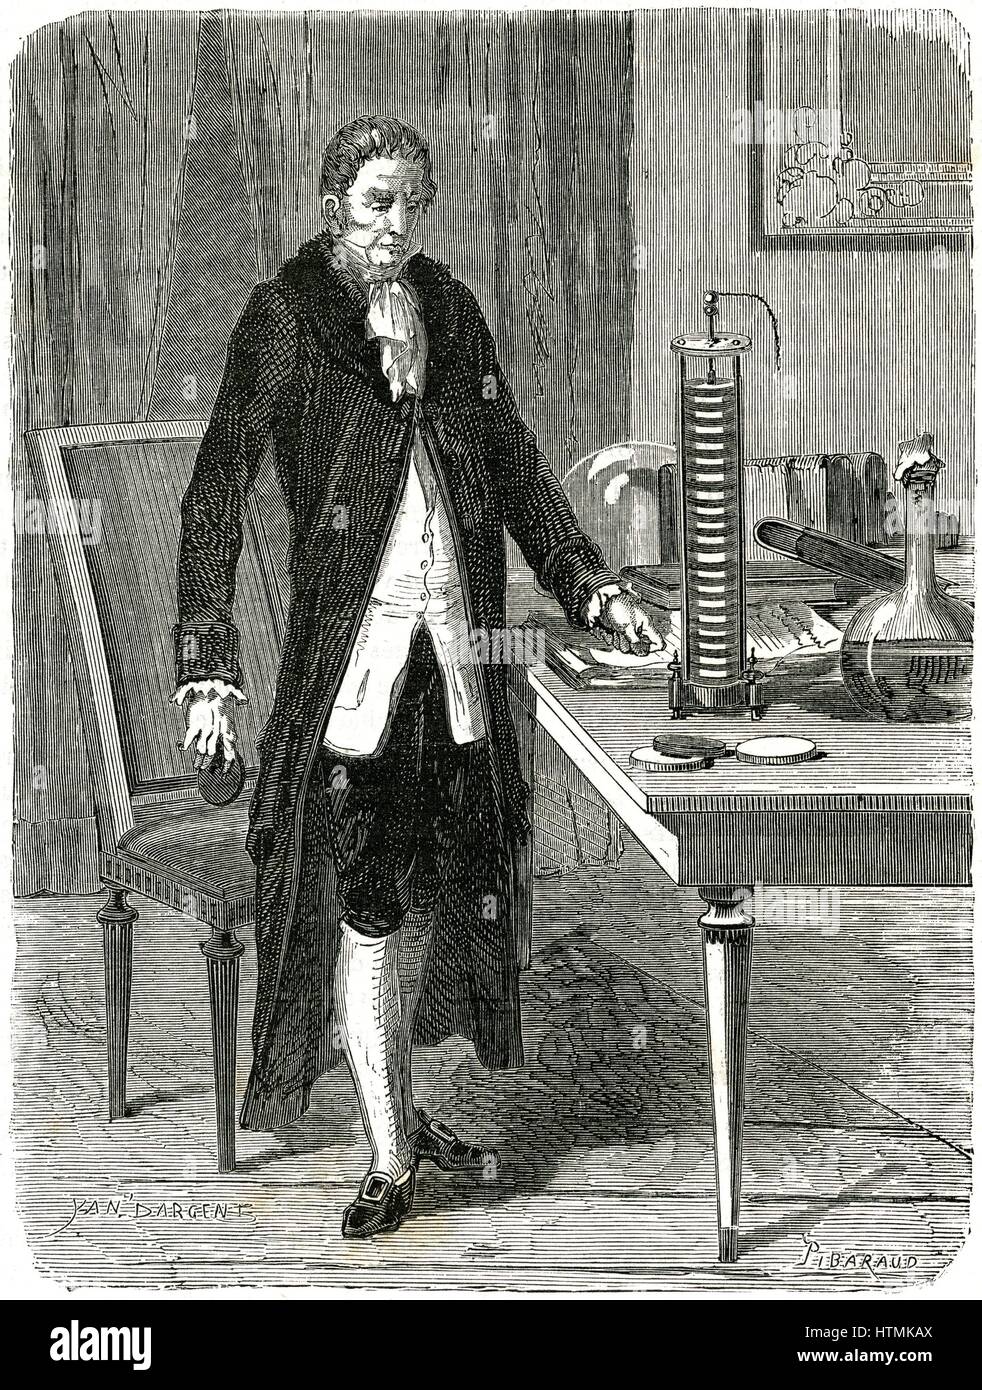 Alessandro Volta (1745-1827) Italian physicist, demonstrating his electric pile (battery). Wood engraving, Paris, c.1870 Stock Photo